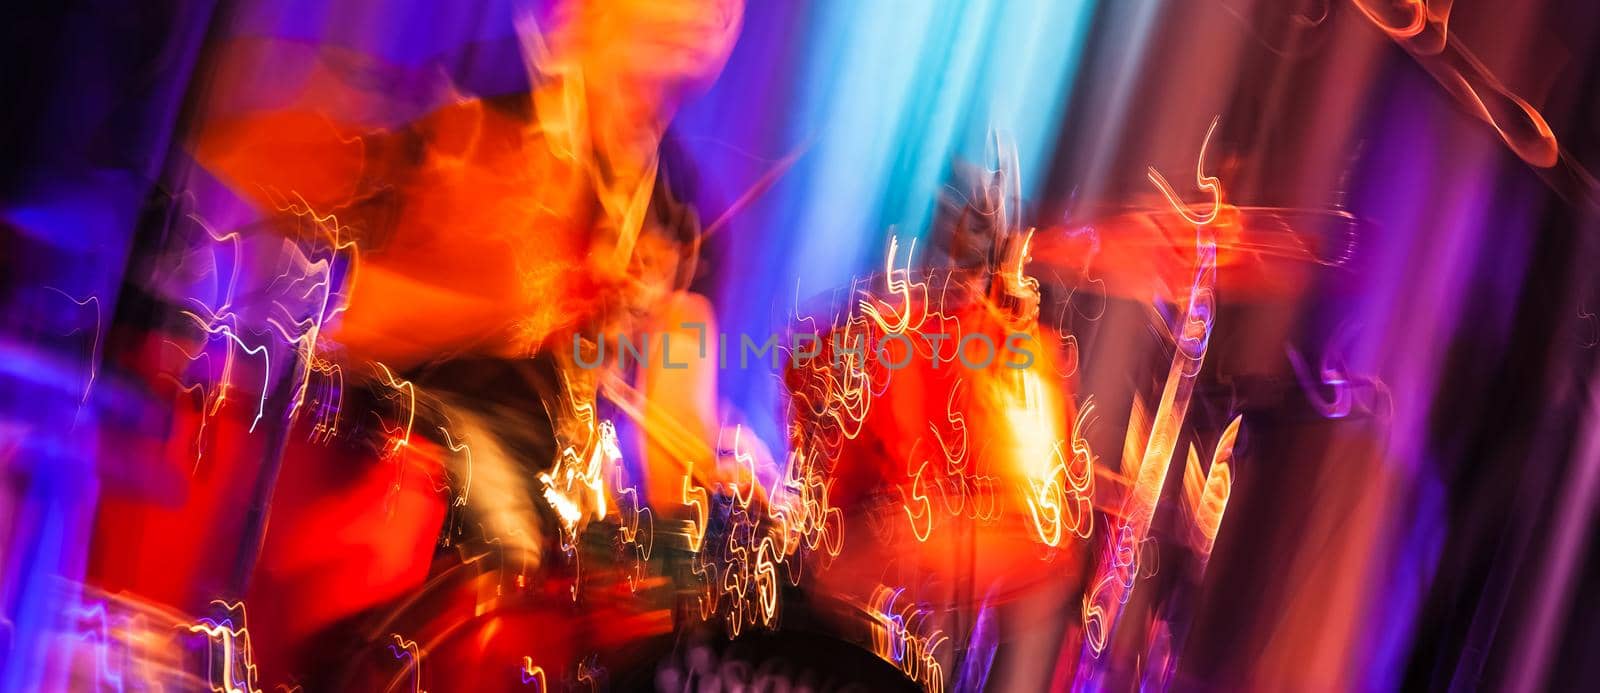 Musician with drums. Abstract image of a drummer at concert. The Sound of Music concept. Intentional motion blur